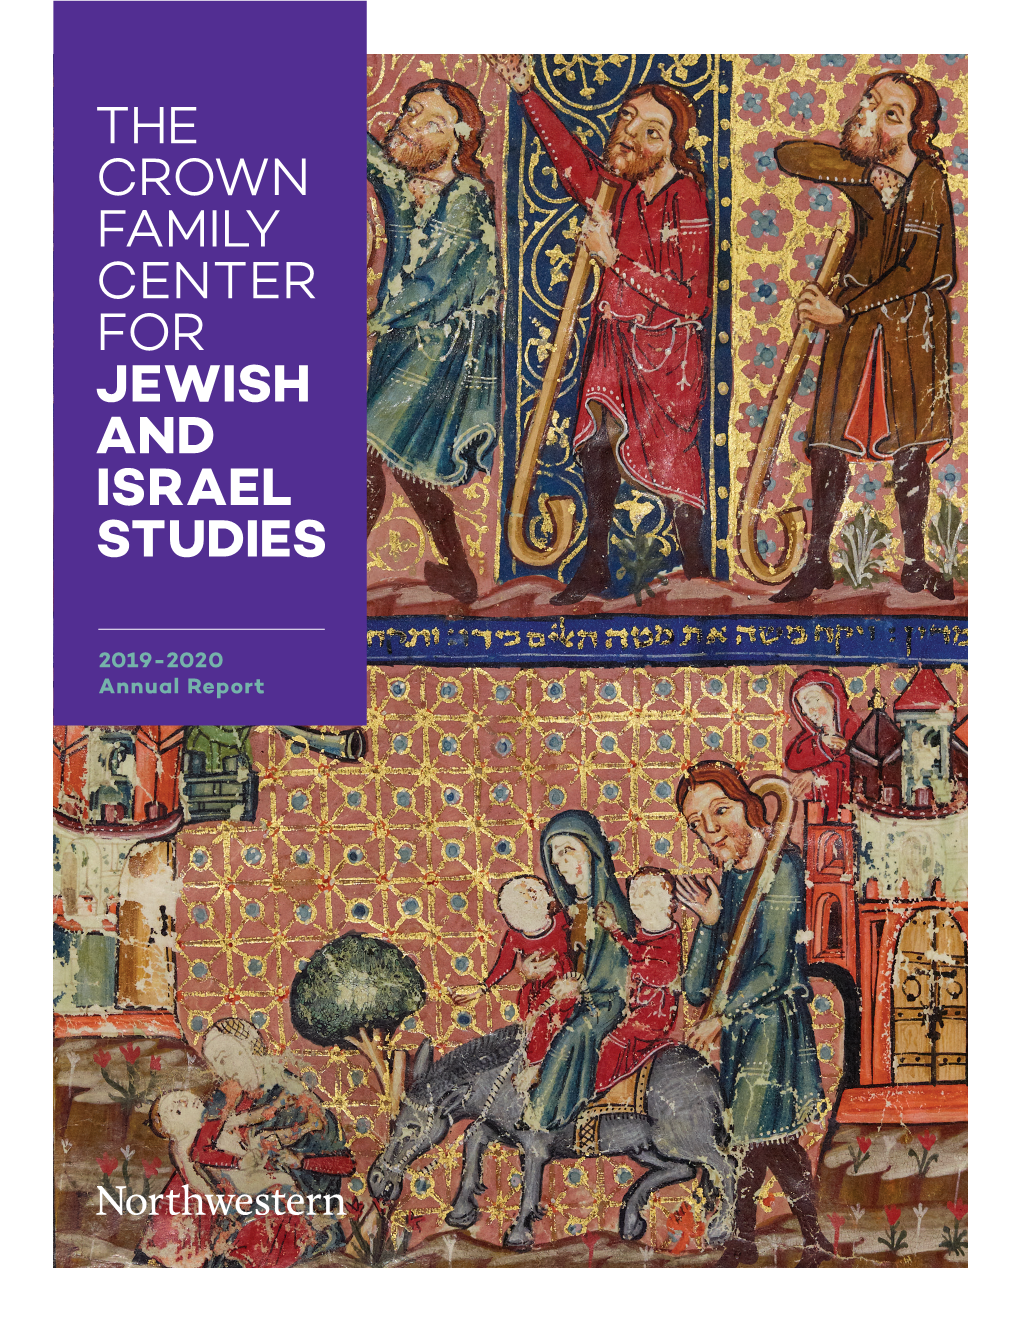 The Crown Family Center for Jewish and Israel Studies